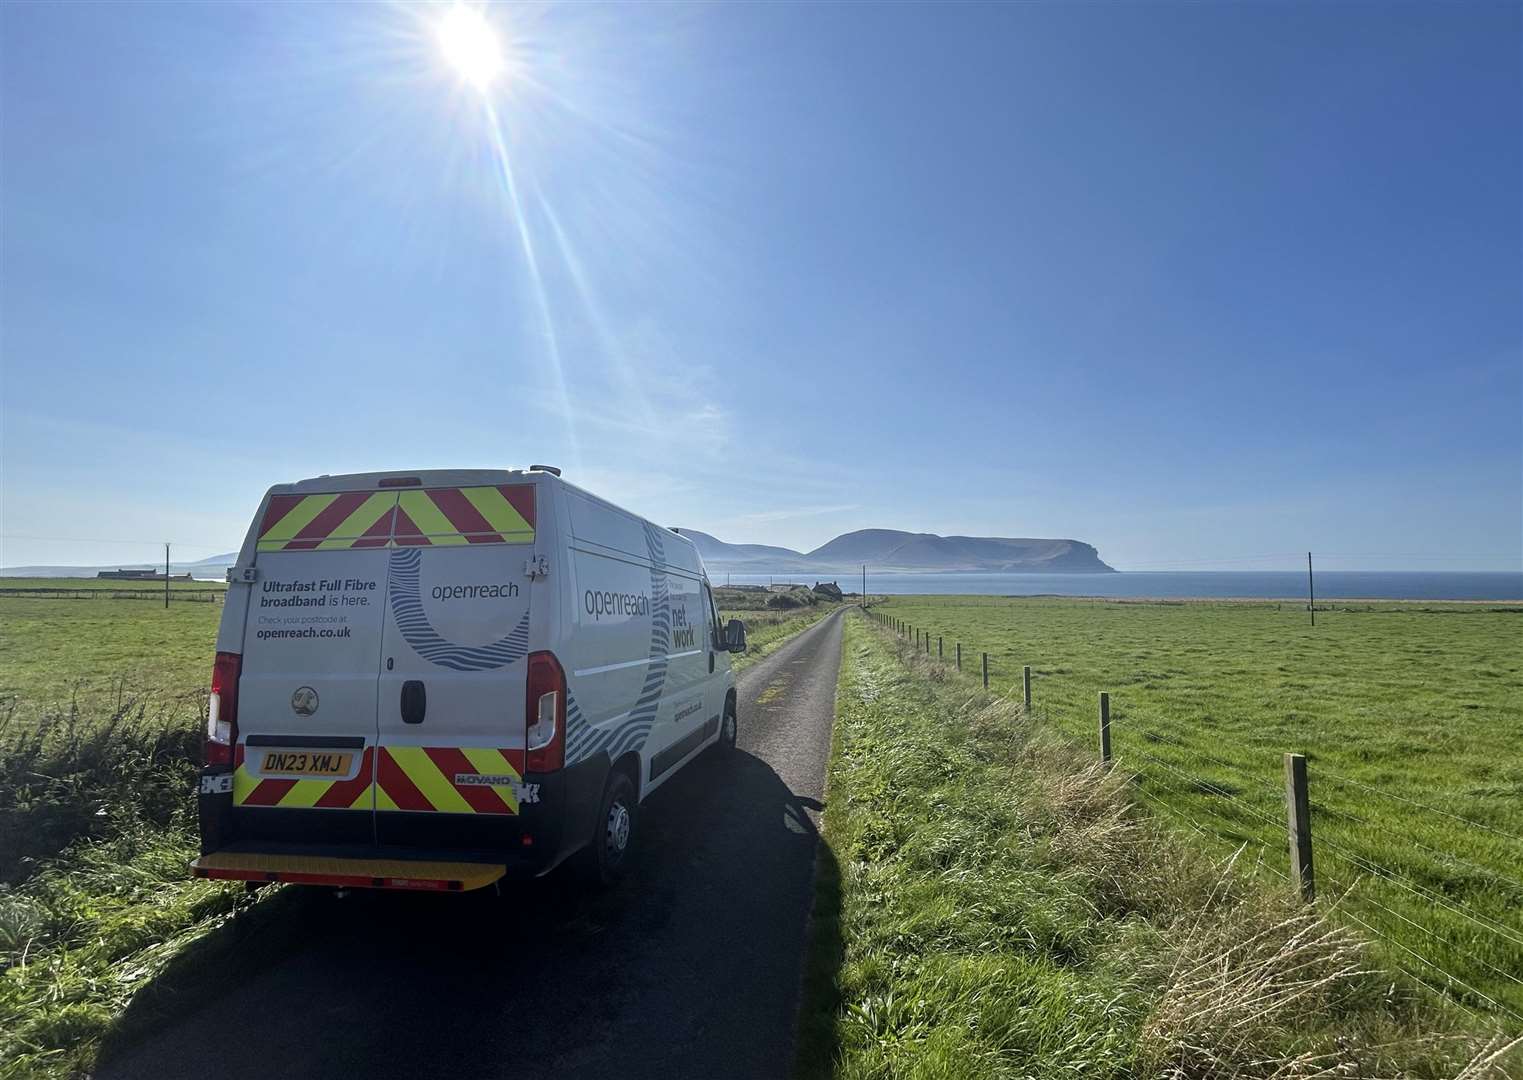 Some 3300 households and businesses in the Highlands can now connect to better broadband speeds through the R100 programme.